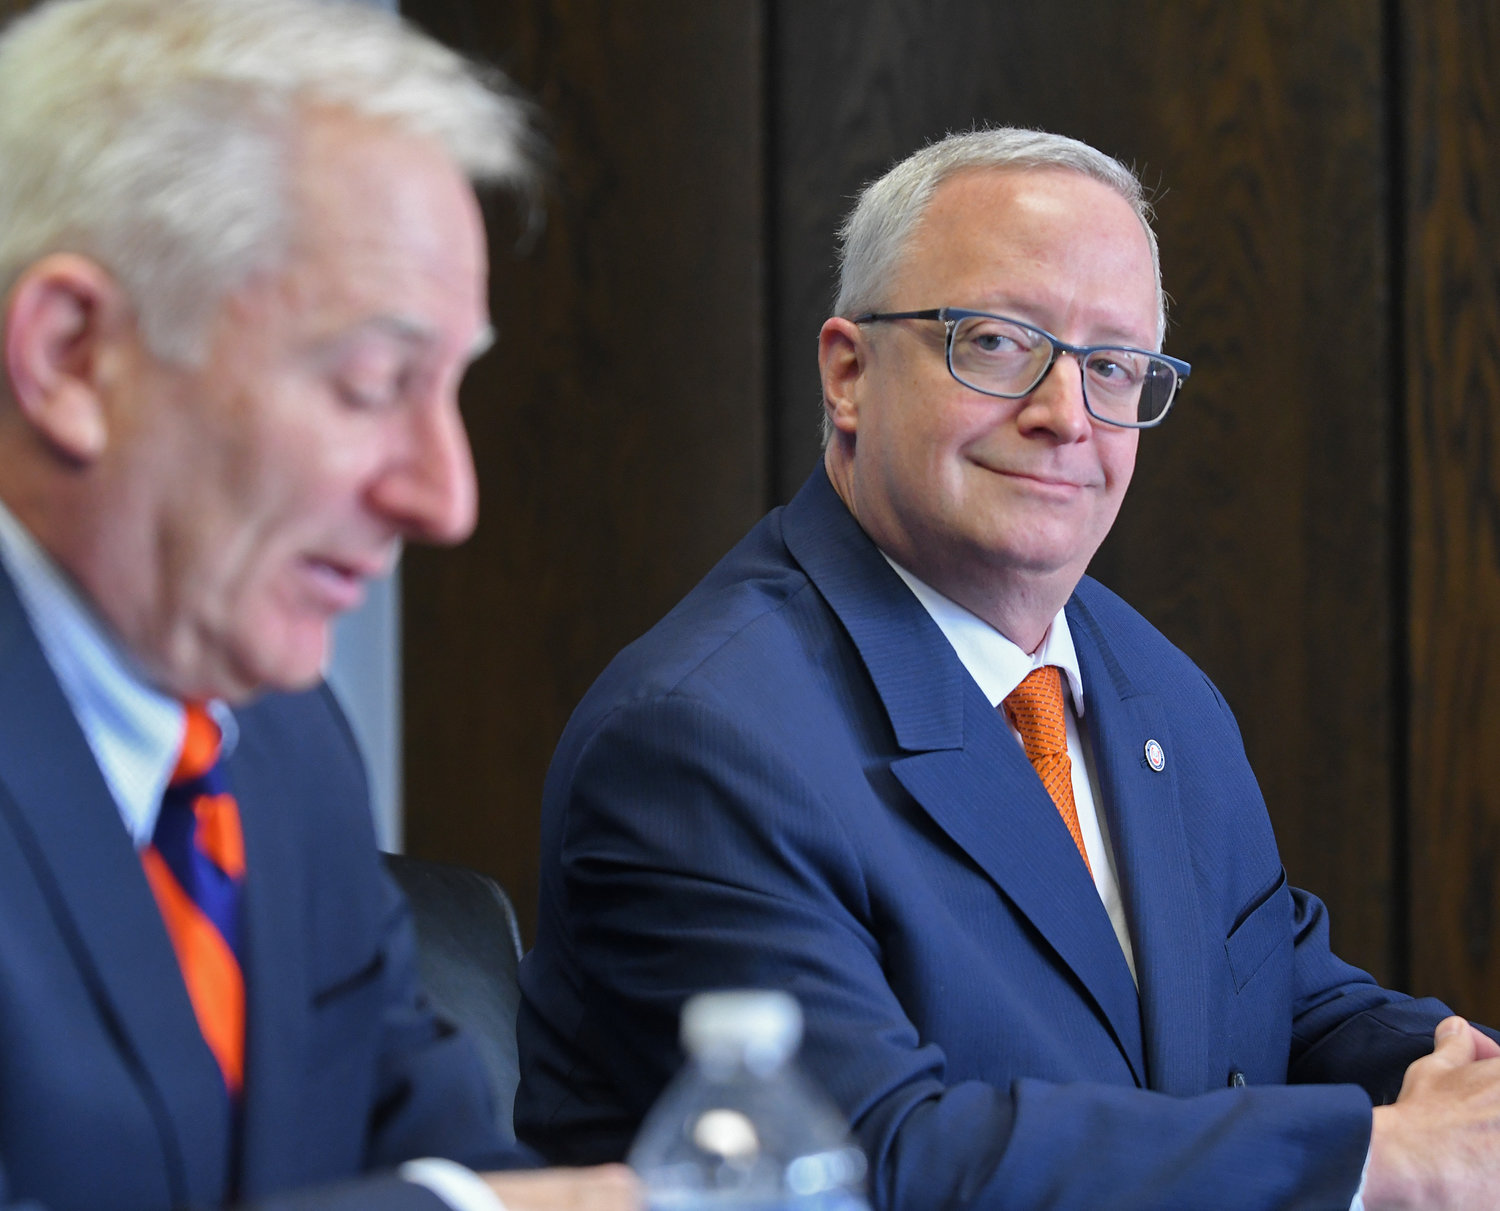 Todd Pfannestiel, right, listens to Utica University Board of Trustees Chairperson Bob Brvenik Monday, Feb. 27, as Brvenik announces Pfannestiel’s selection as the university’s 10th president.  Pfannestiel will take the helm of the university on Aug. 1, following the July 31 retirement of current president Laura Casamento.